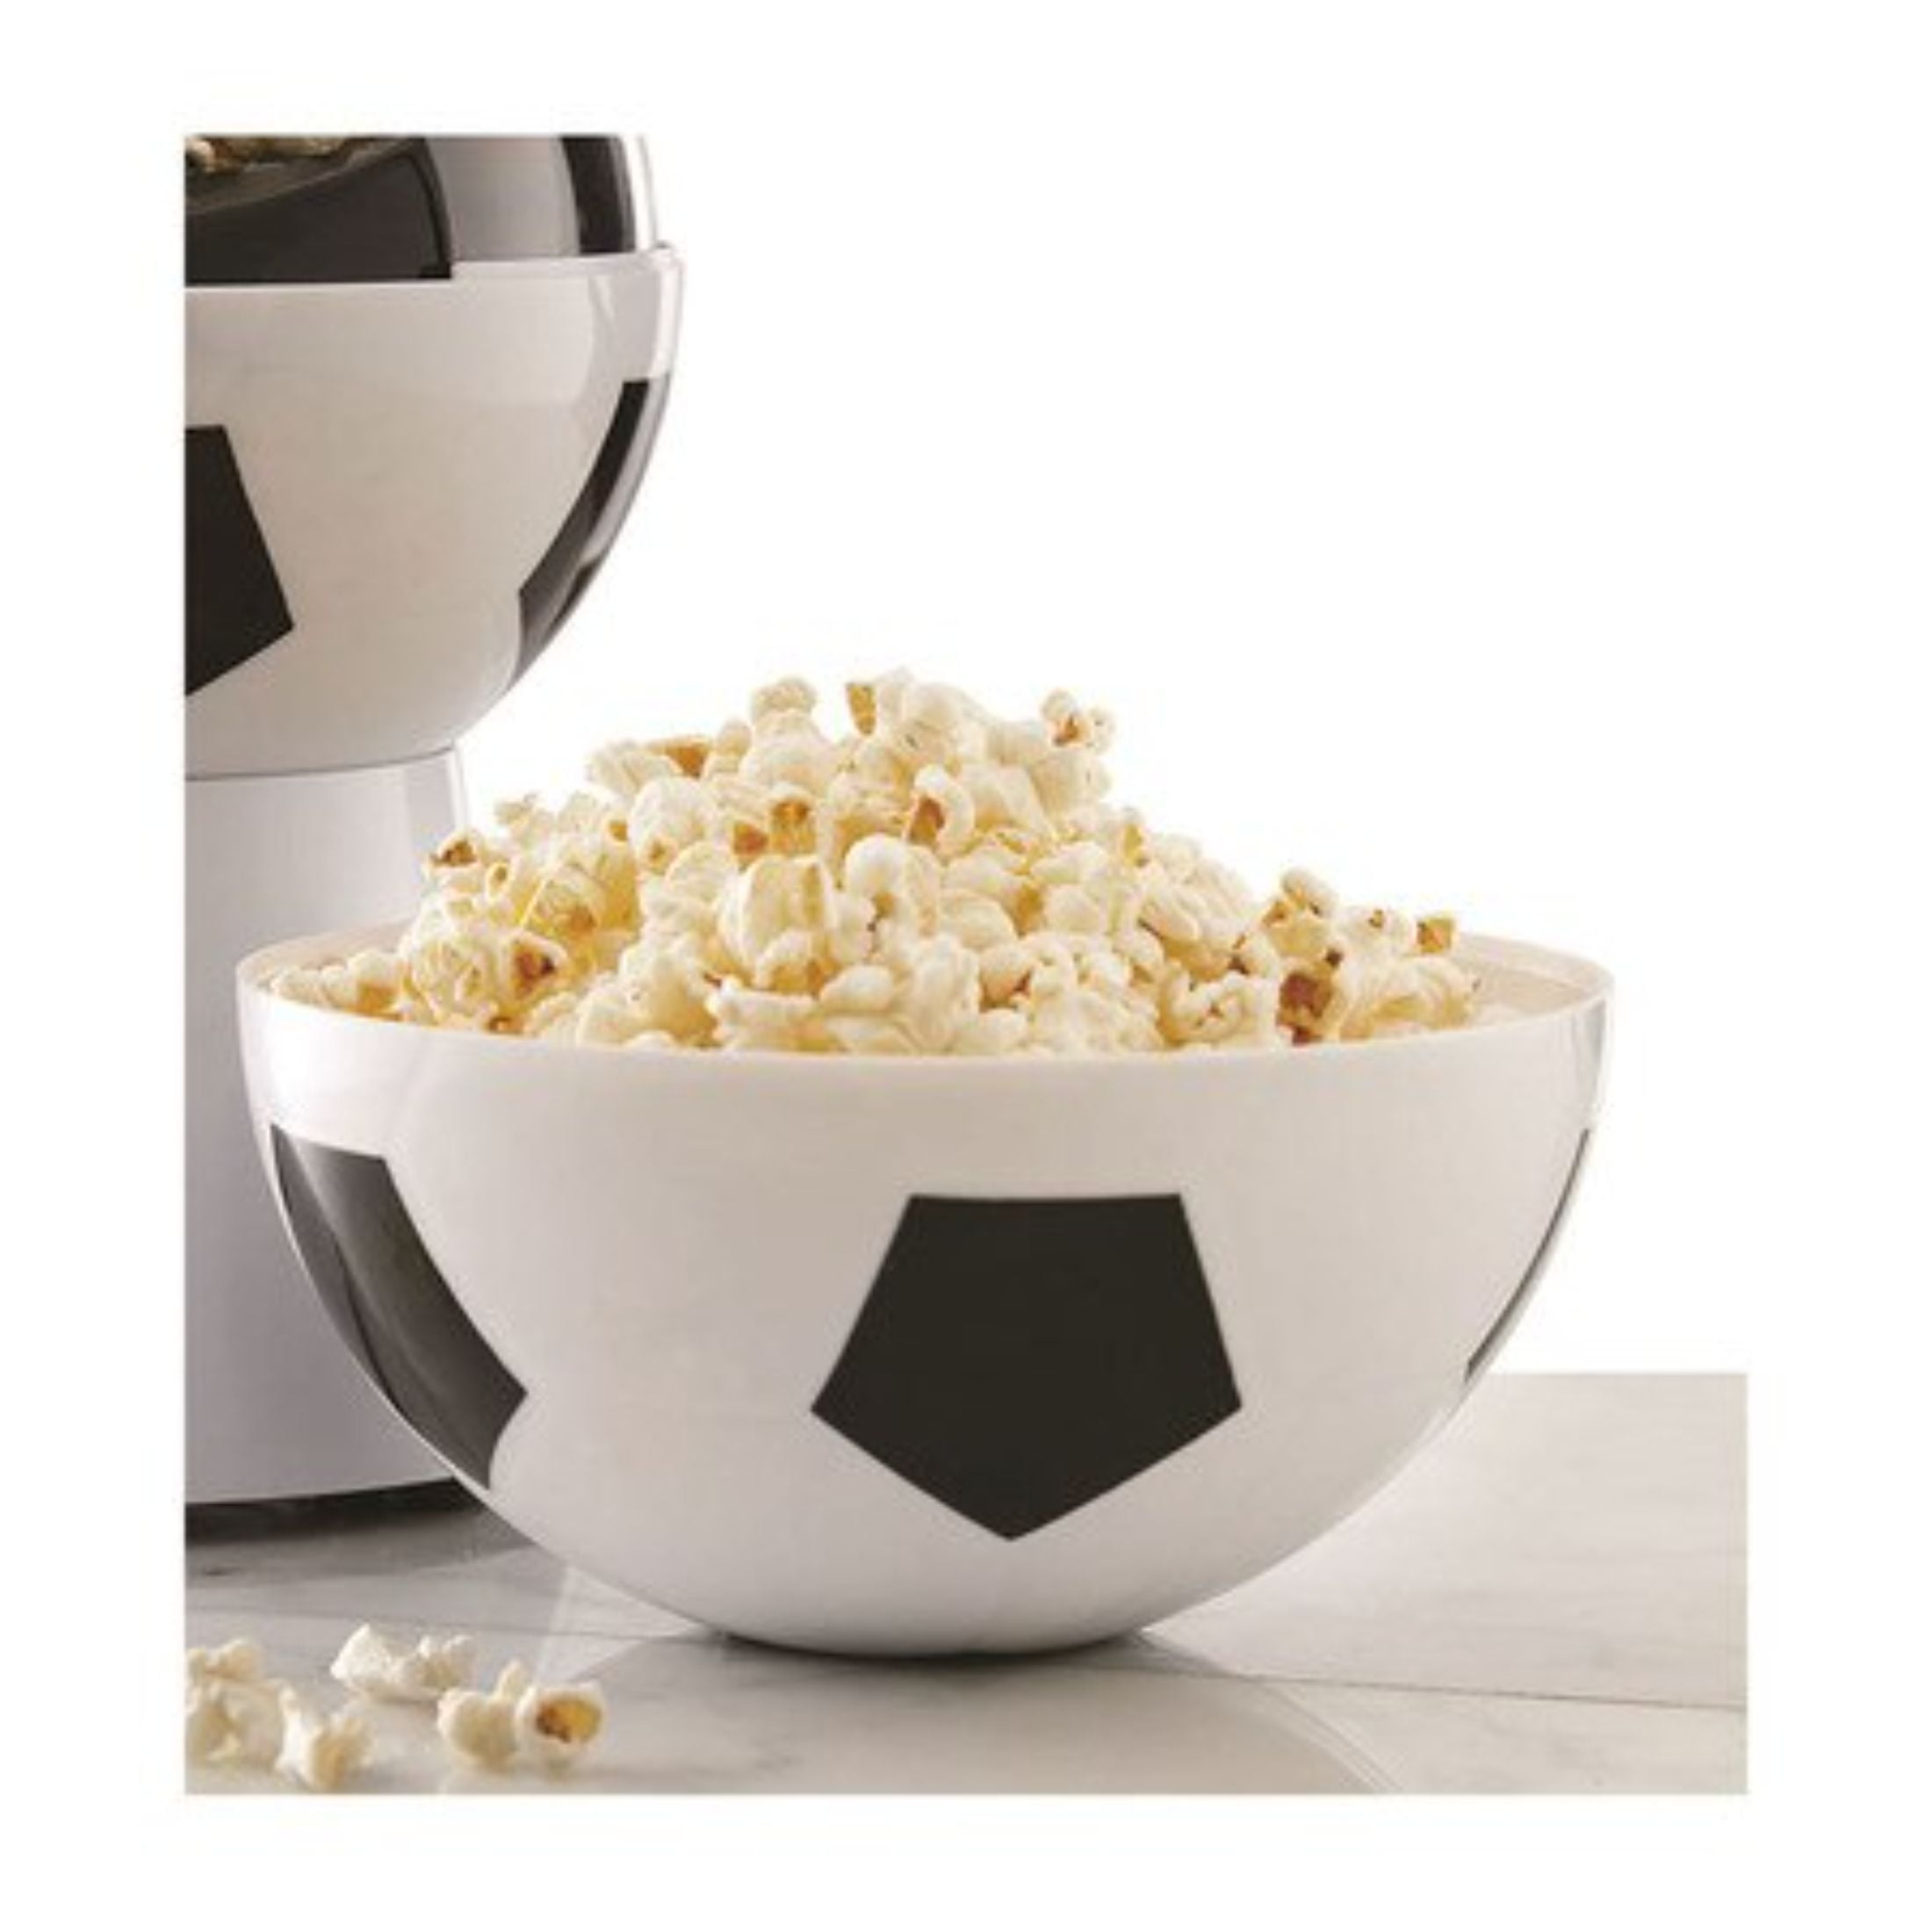 Brentwood PC-486W 8-Cup Hot Air Popcorn Maker, White - Brentwood